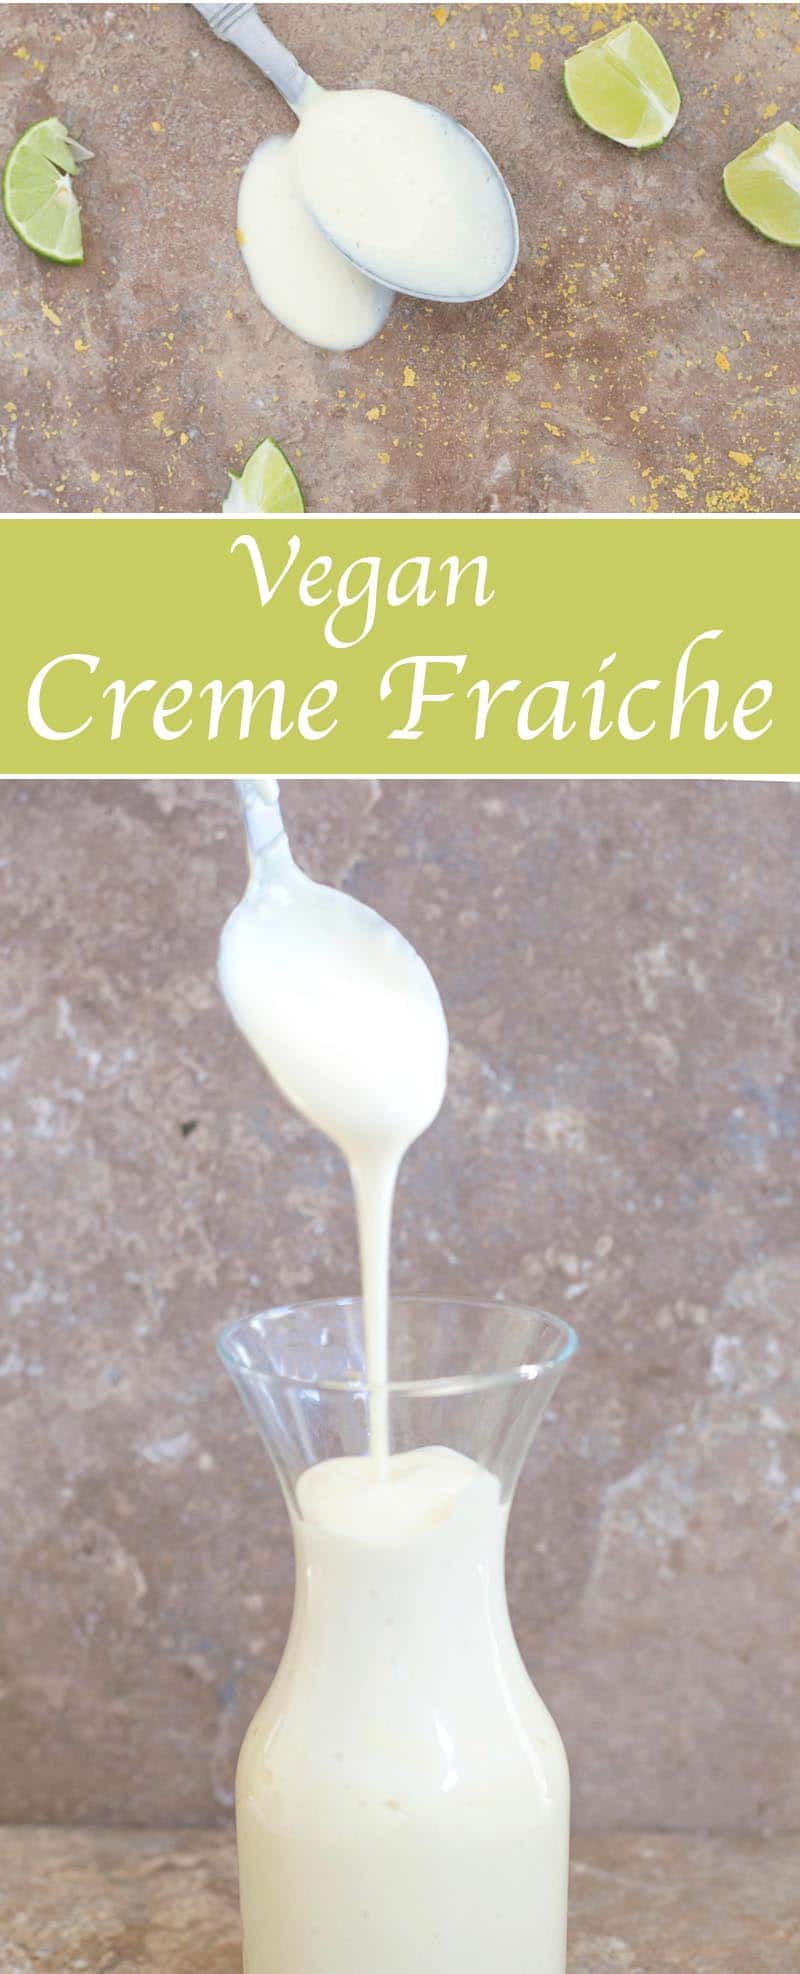 If you are looking for a healthier creme fraiche substitute? This vegan version will truly satisfy that craving! Uses only 4 ingredients and made in 15 minutes or less.